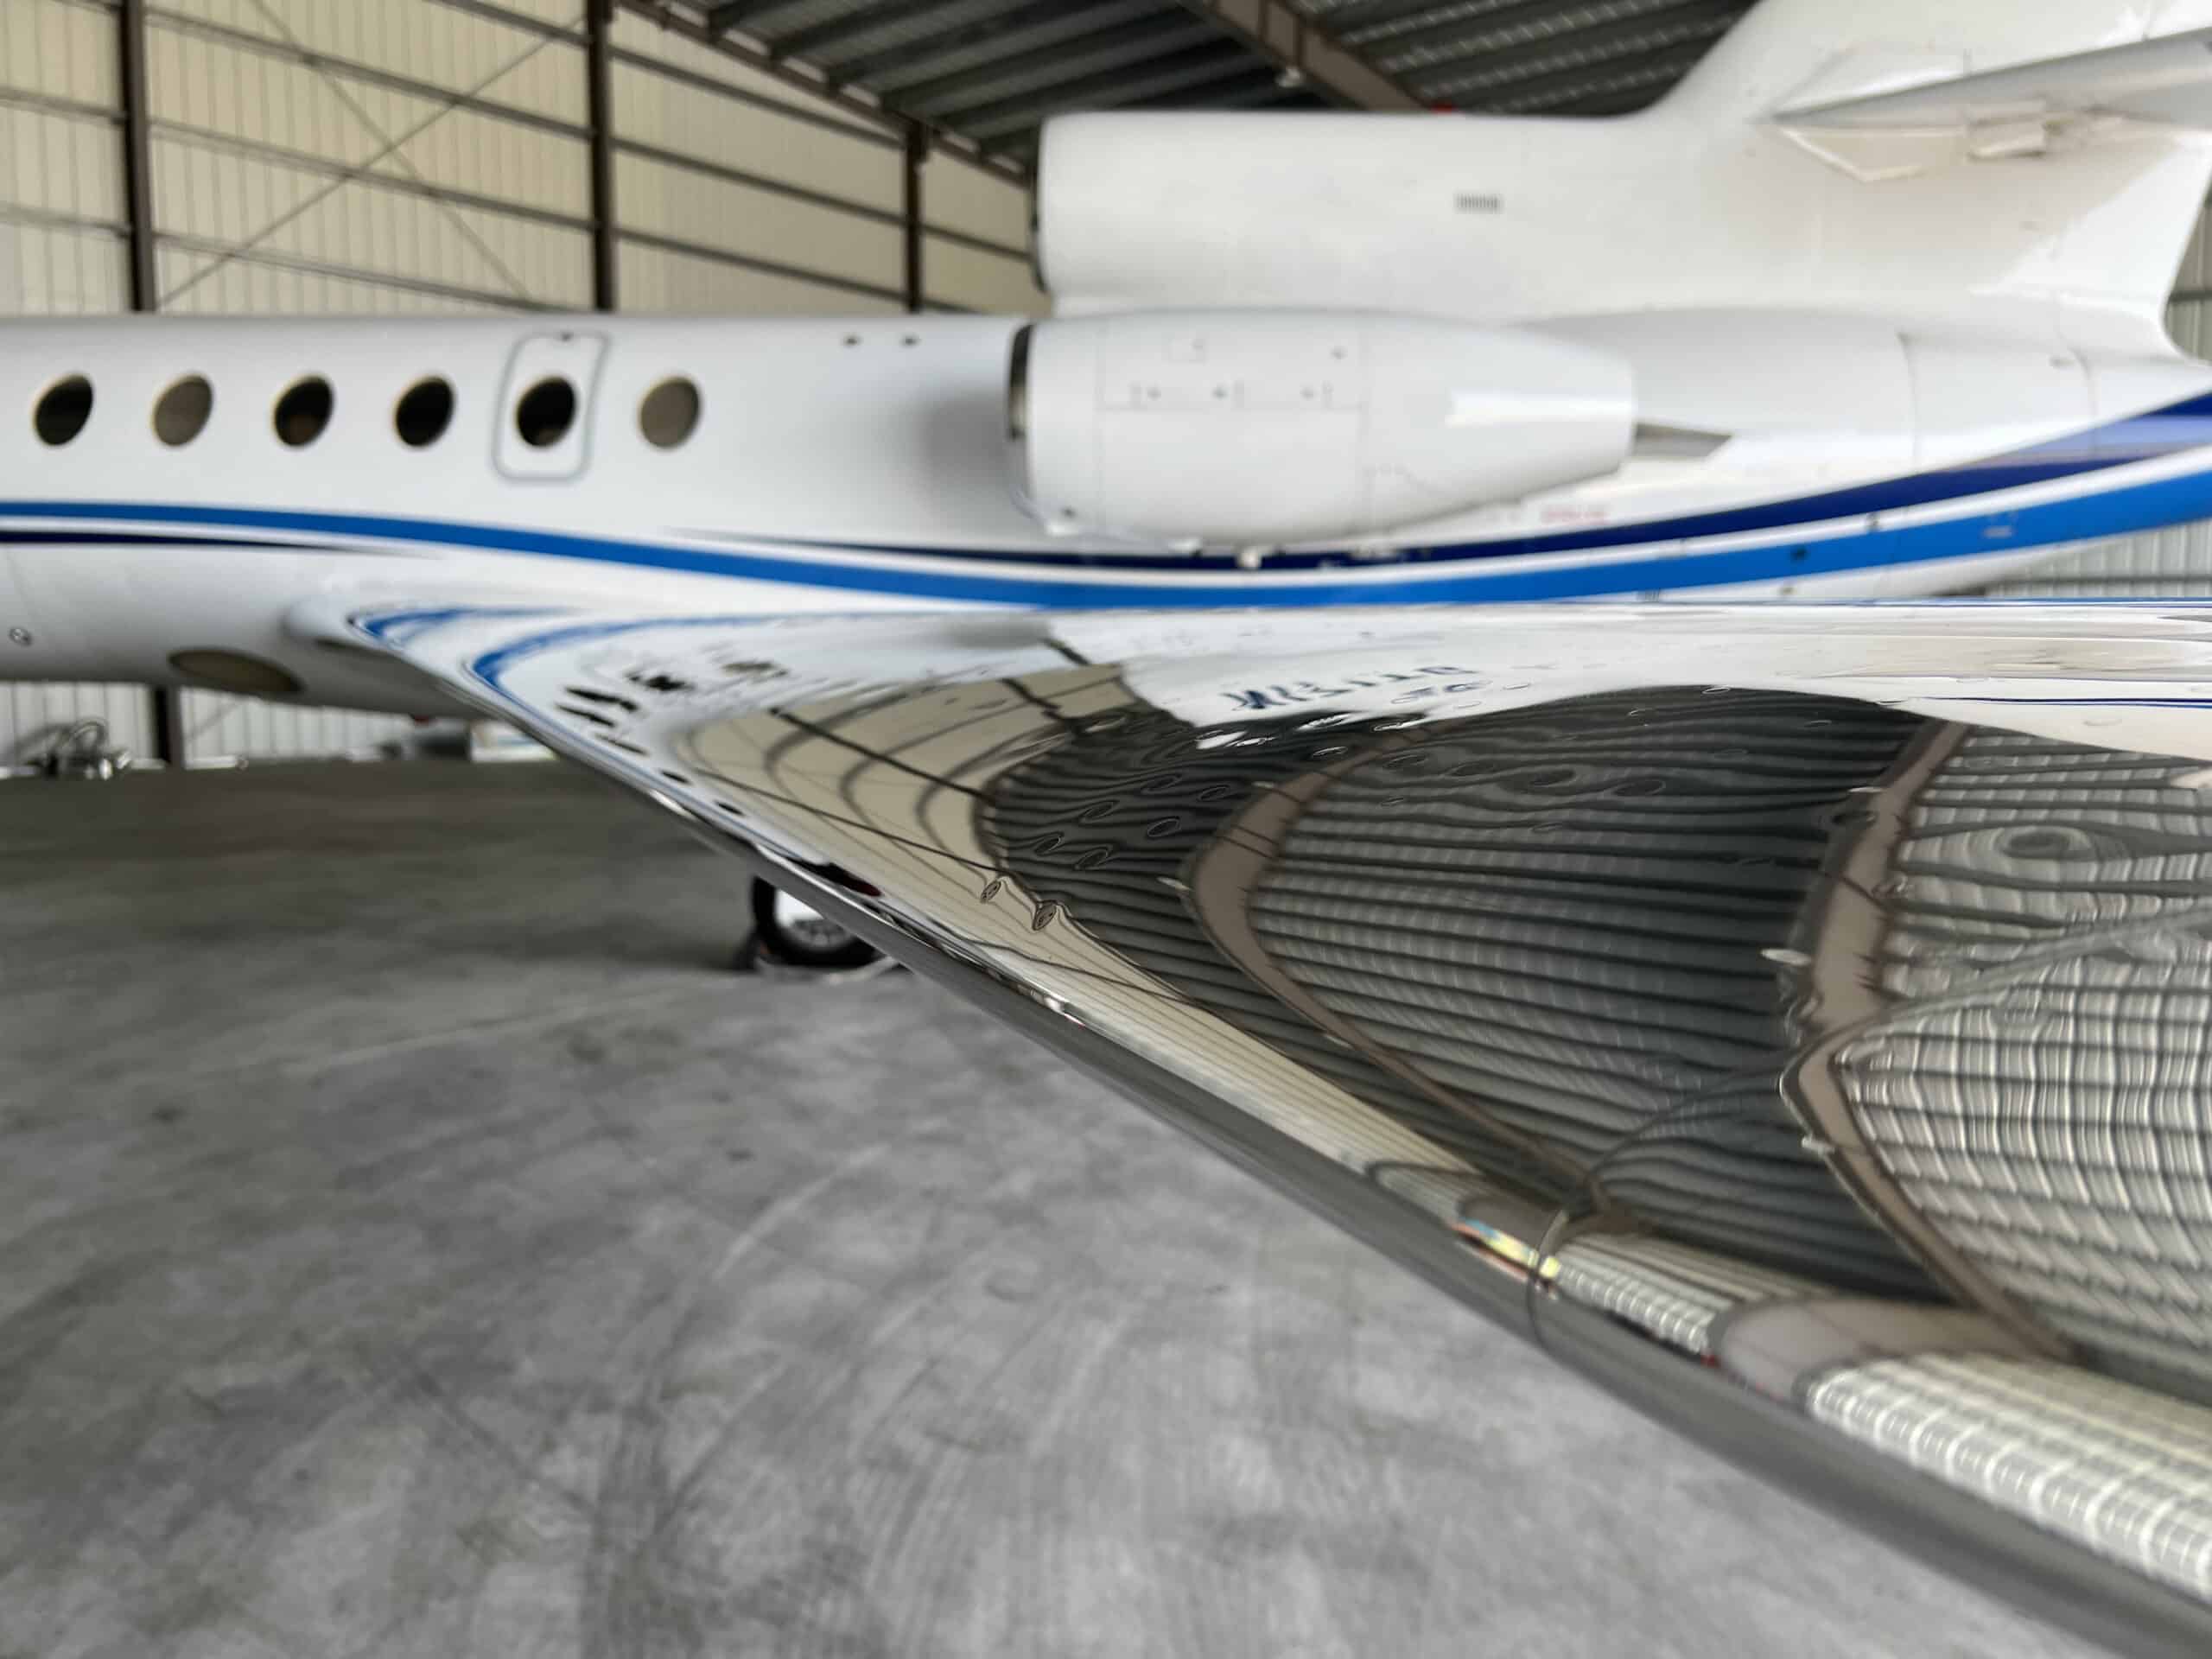 The finished result of aircraft maintenance services on the wing of a private jet.